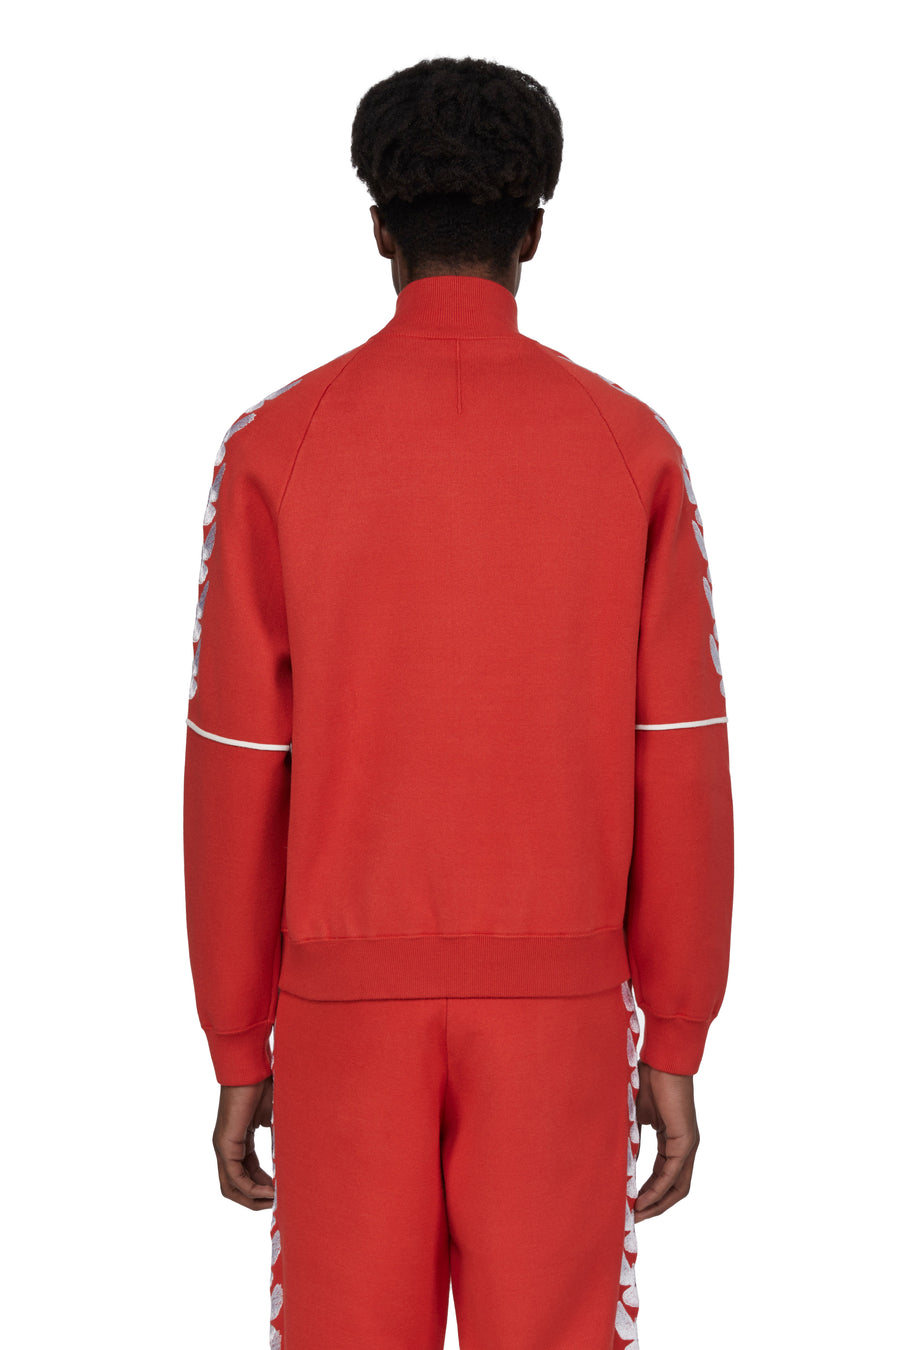 UNITY DOVES RED TRACK JACKET